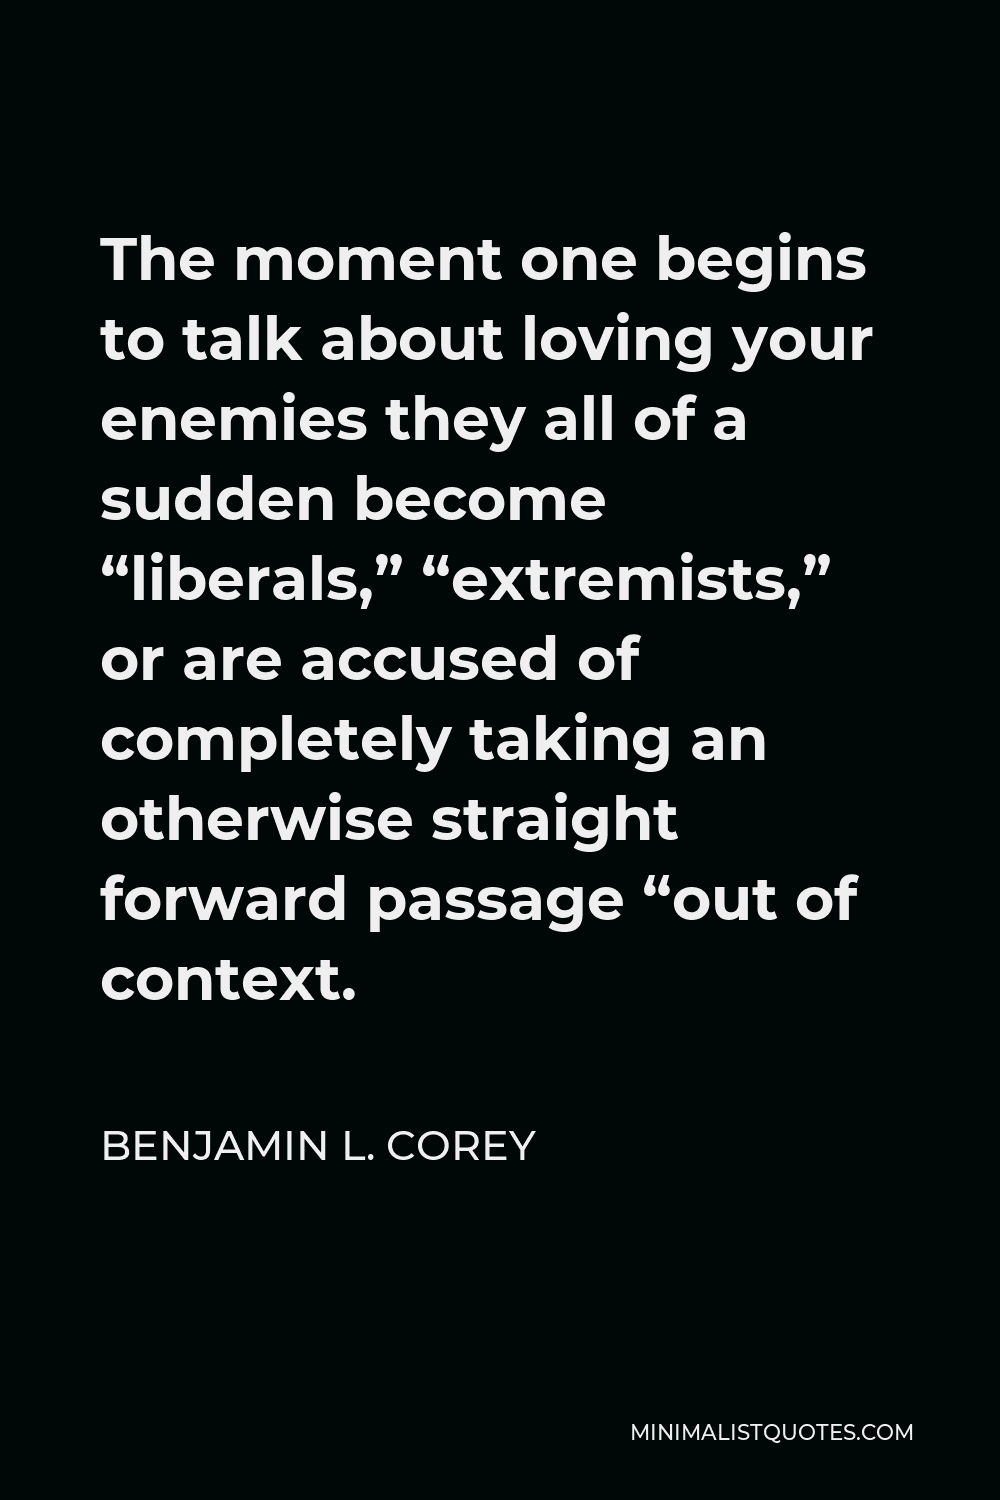 Benjamin L. Corey Quote - The moment one begins to talk about loving your enemies they all of a sudden become “liberals,” “extremists,” or are accused of completely taking an otherwise straight forward passage “out of context.